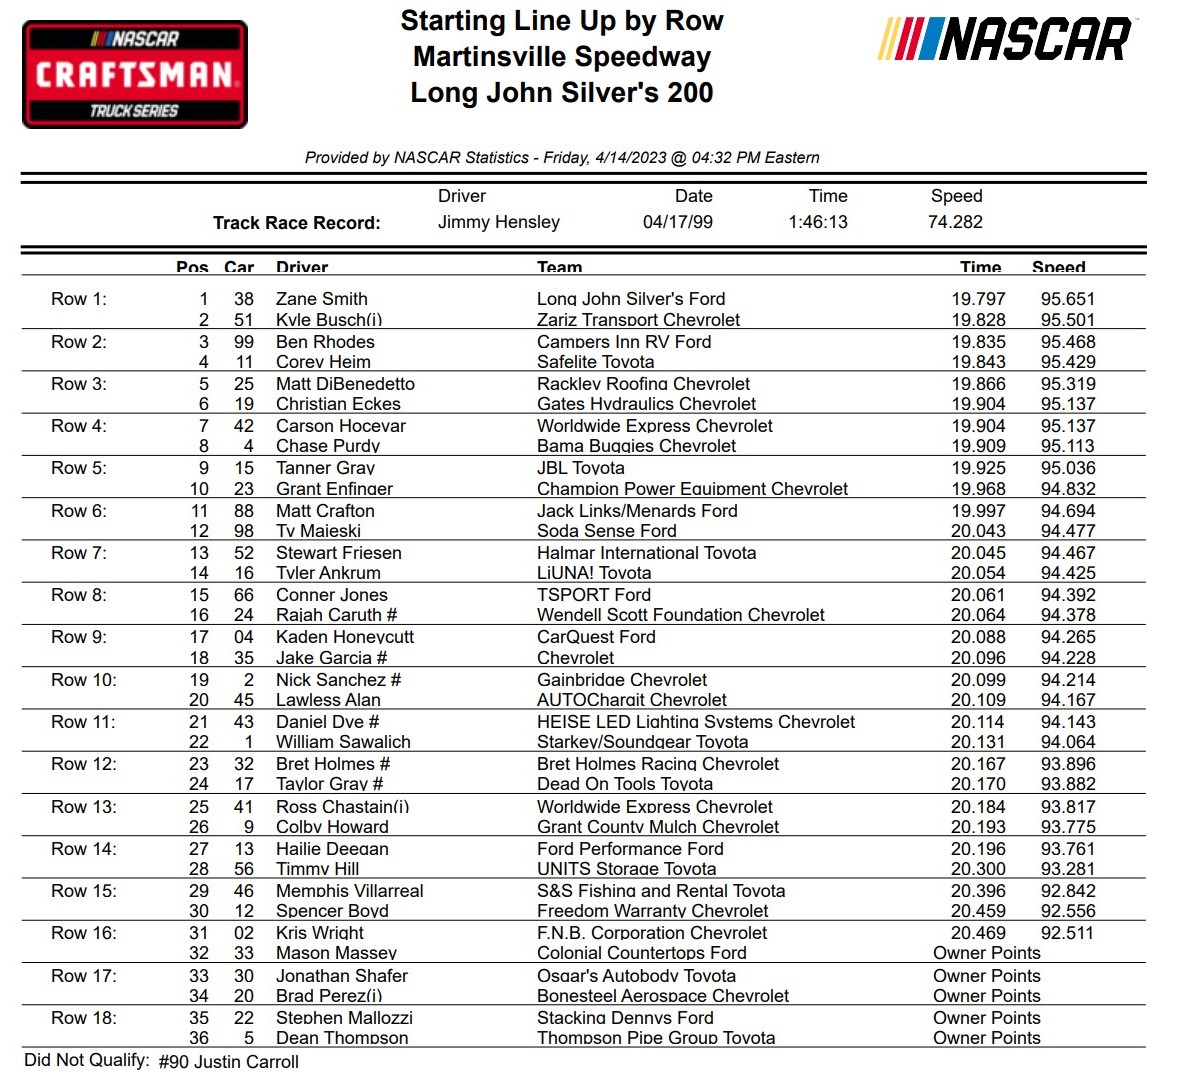 Truck Series Martinsville Qualifying Results/ Starting Lineup